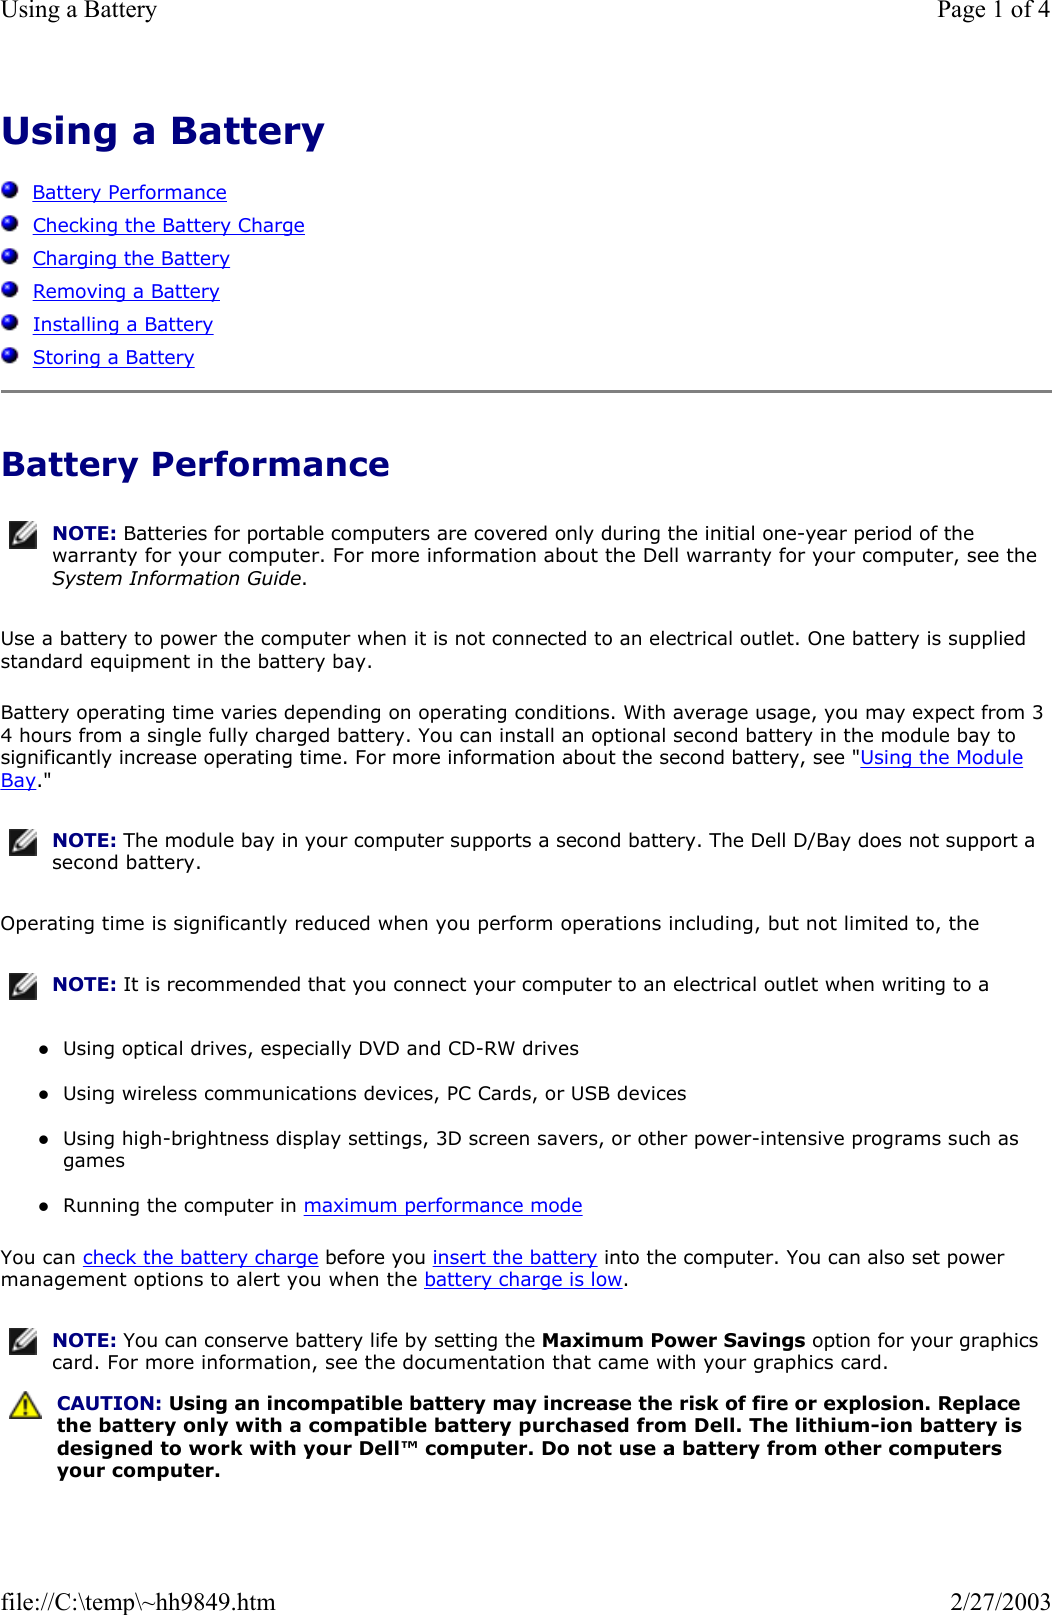 Using a Battery      Battery Performance   Checking the Battery Charge   Charging the Battery   Removing a Battery   Installing a Battery   Storing a Battery Battery Performance Use a battery to power the computer when it is not connected to an electrical outlet. One battery is supplied standard equipment in the battery bay. Battery operating time varies depending on operating conditions. With average usage, you may expect from 3 4 hours from a single fully charged battery. You can install an optional second battery in the module bay to significantly increase operating time. For more information about the second battery, see &quot;Using the Module Bay.&quot; Operating time is significantly reduced when you perform operations including, but not limited to, the zUsing optical drives, especially DVD and CD-RW drives  zUsing wireless communications devices, PC Cards, or USB devices  zUsing high-brightness display settings, 3D screen savers, or other power-intensive programs such as games  zRunning the computer in maximum performance mode  You can check the battery charge before you insert the battery into the computer. You can also set power management options to alert you when the battery charge is low. NOTE: Batteries for portable computers are covered only during the initial one-year period of the warranty for your computer. For more information about the Dell warranty for your computer, see the System Information Guide.NOTE: The module bay in your computer supports a second battery. The Dell D/Bay does not support a second battery.NOTE: It is recommended that you connect your computer to an electrical outlet when writing to a NOTE: You can conserve battery life by setting the Maximum Power Savings option for your graphics card. For more information, see the documentation that came with your graphics card. CAUTION: Using an incompatible battery may increase the risk of fire or explosion. Replace the battery only with a compatible battery purchased from Dell. The lithium-ion battery is designed to work with your Dell™ computer. Do not use a battery from other computers your computer. Page 1 of 4Using a Battery2/27/2003file://C:\temp\~hh9849.htm